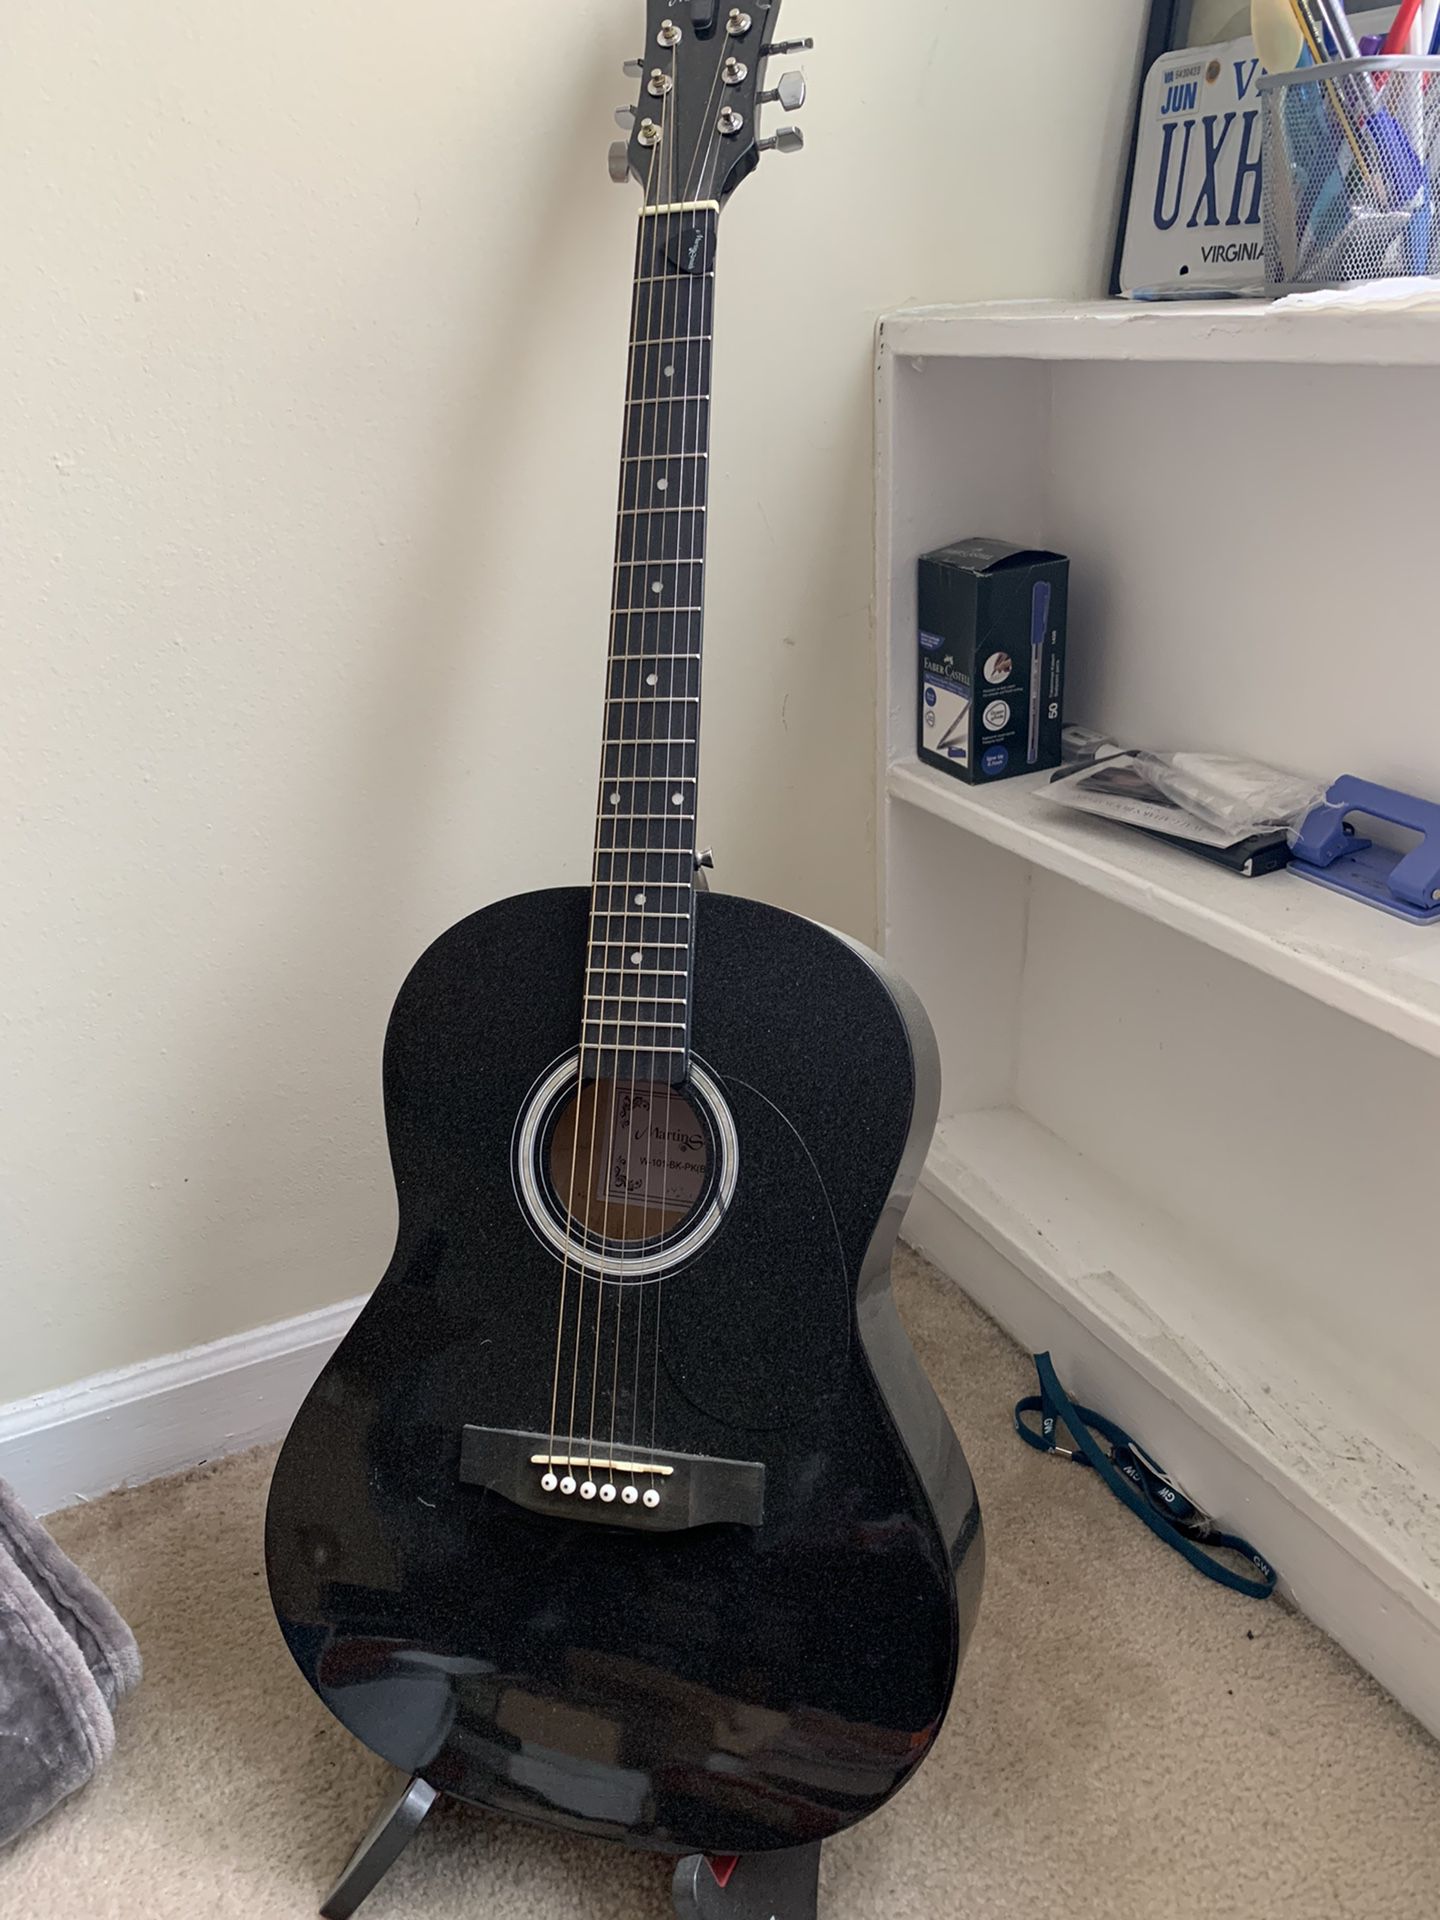 Martin Smith, 38” Beginner Acoustic Guitar w/ capo and floor stand